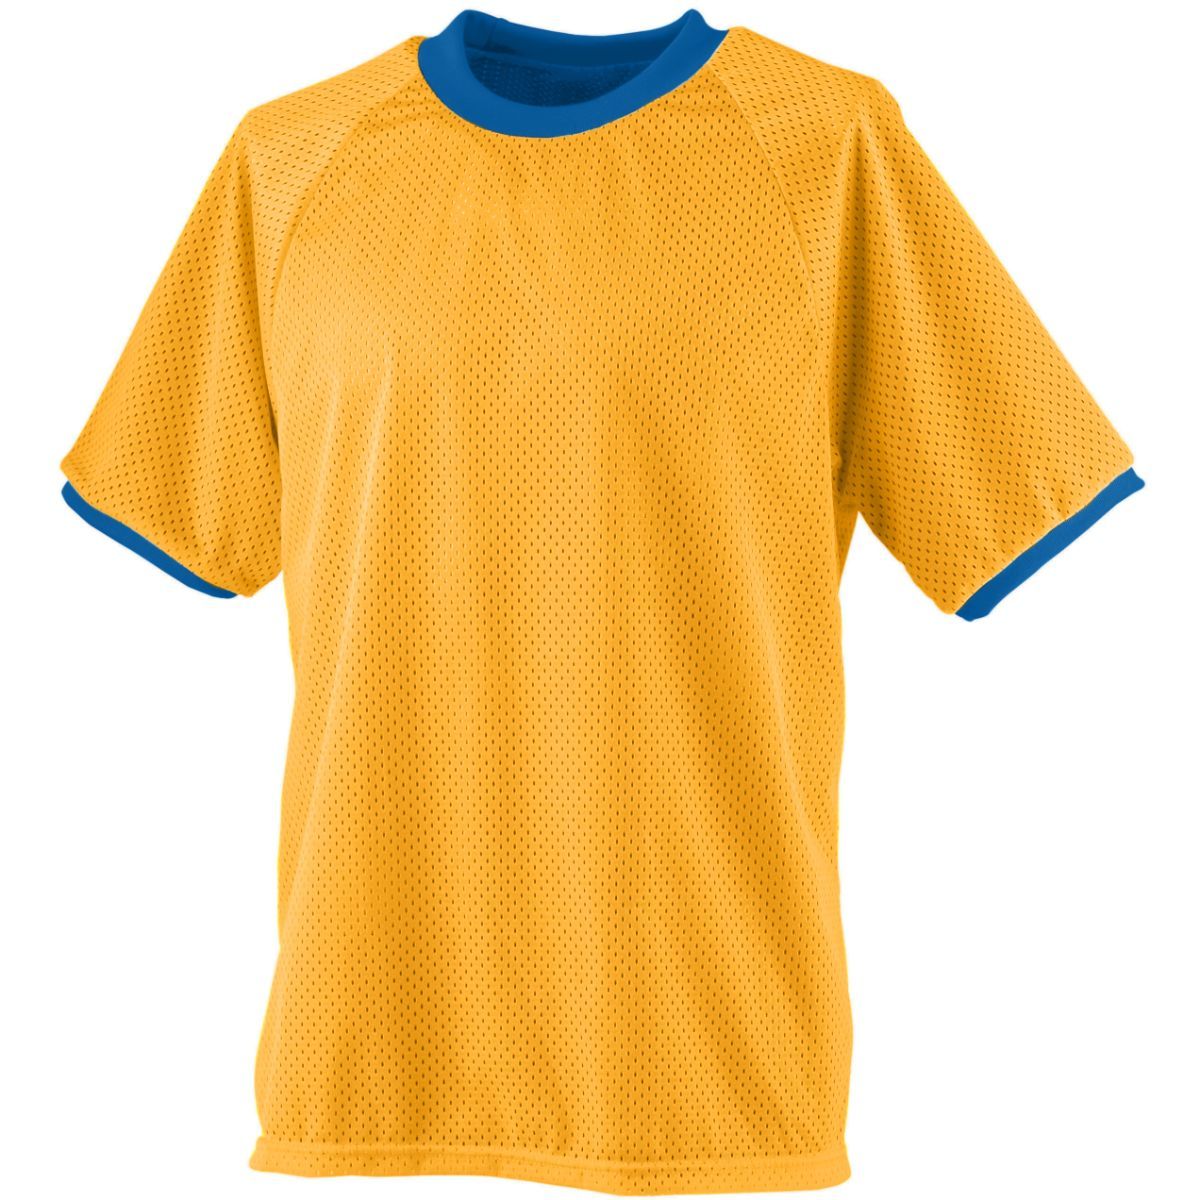 Augusta Sportswear Youth Reversible Practice Jersey in Gold/Royal  -Part of the Youth, Youth-Jersey, Augusta-Products, Soccer, Shirts, All-Sports-1 product lines at KanaleyCreations.com